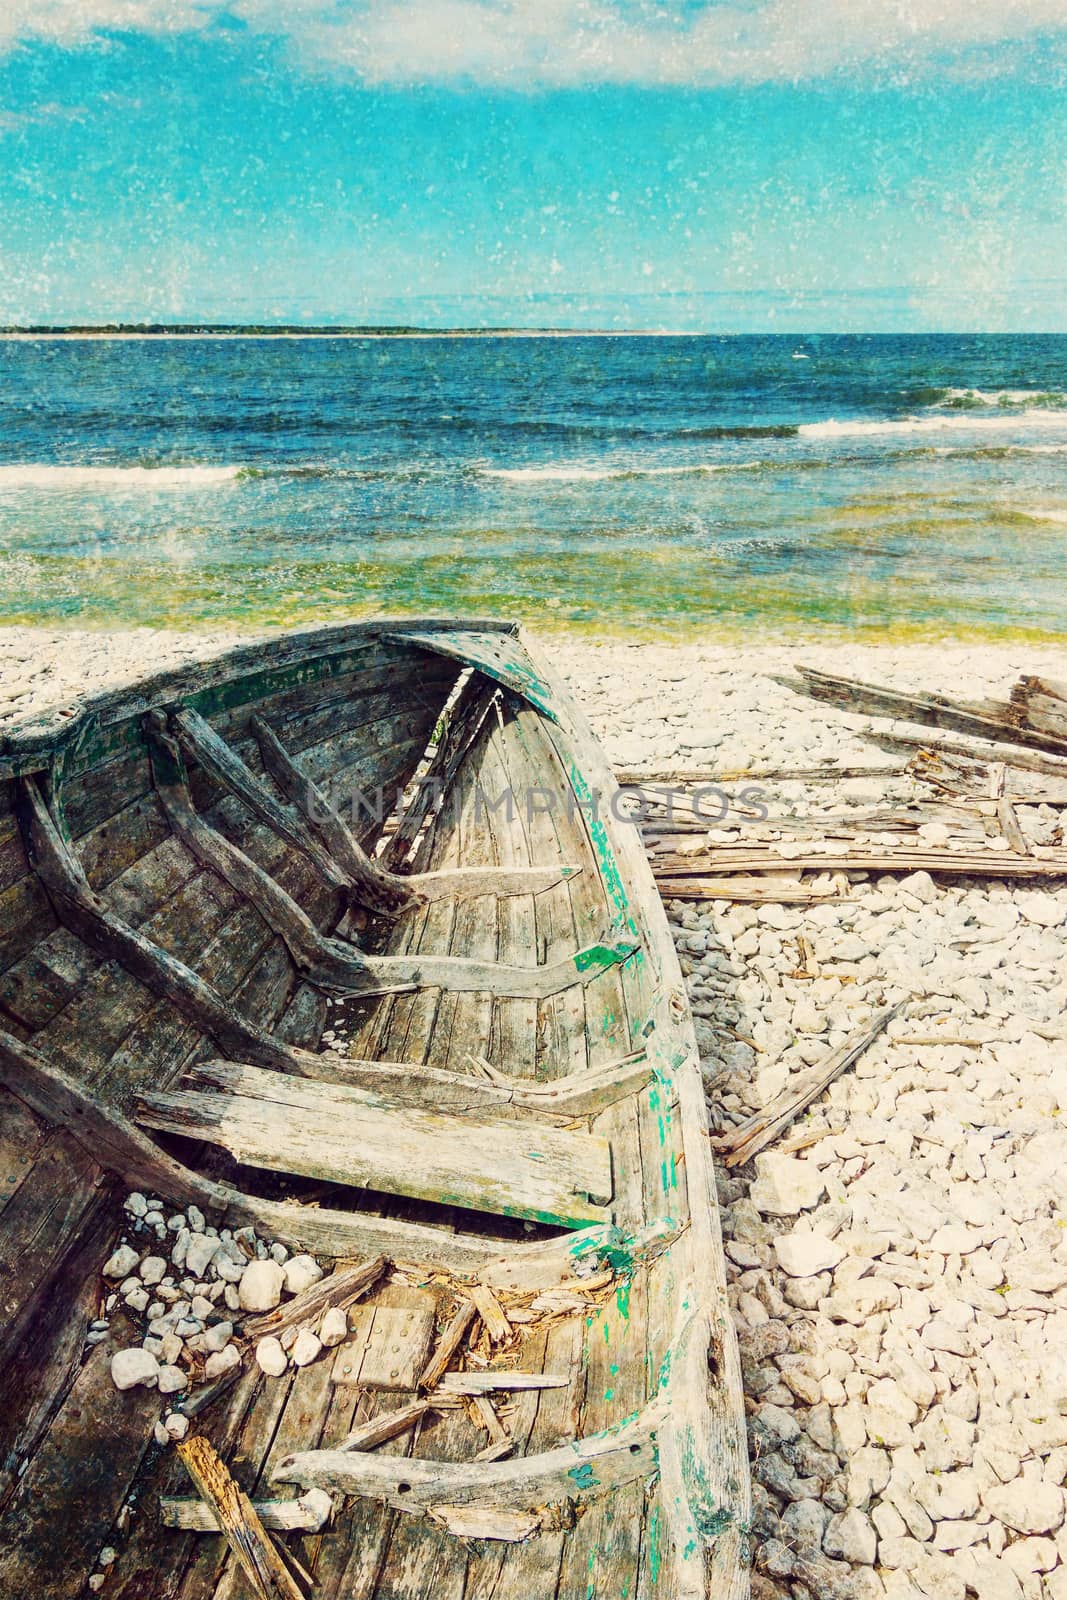 Old wooden boat on the seashore, vintage styled aged photo.